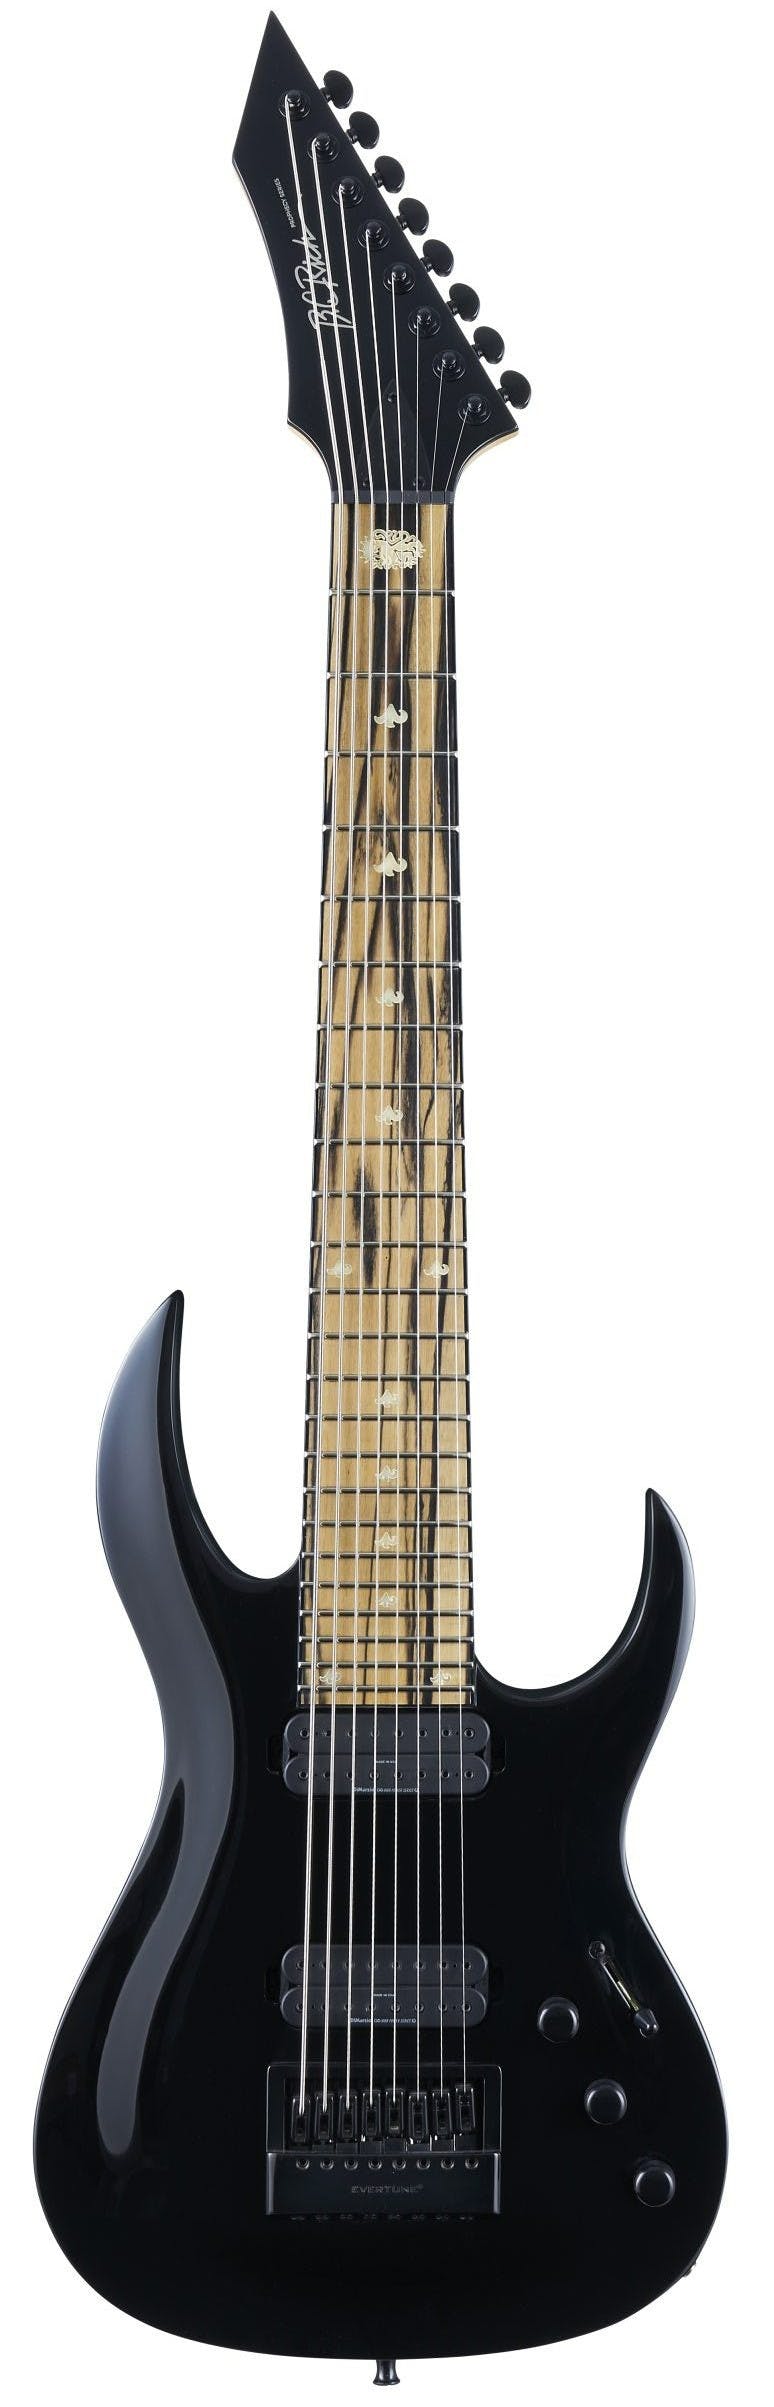 BC Rich Prophecy Series Shredzilla 8 Archtop Electric Guitar with EverTune  II in Gloss Black - Andertons Music Co.